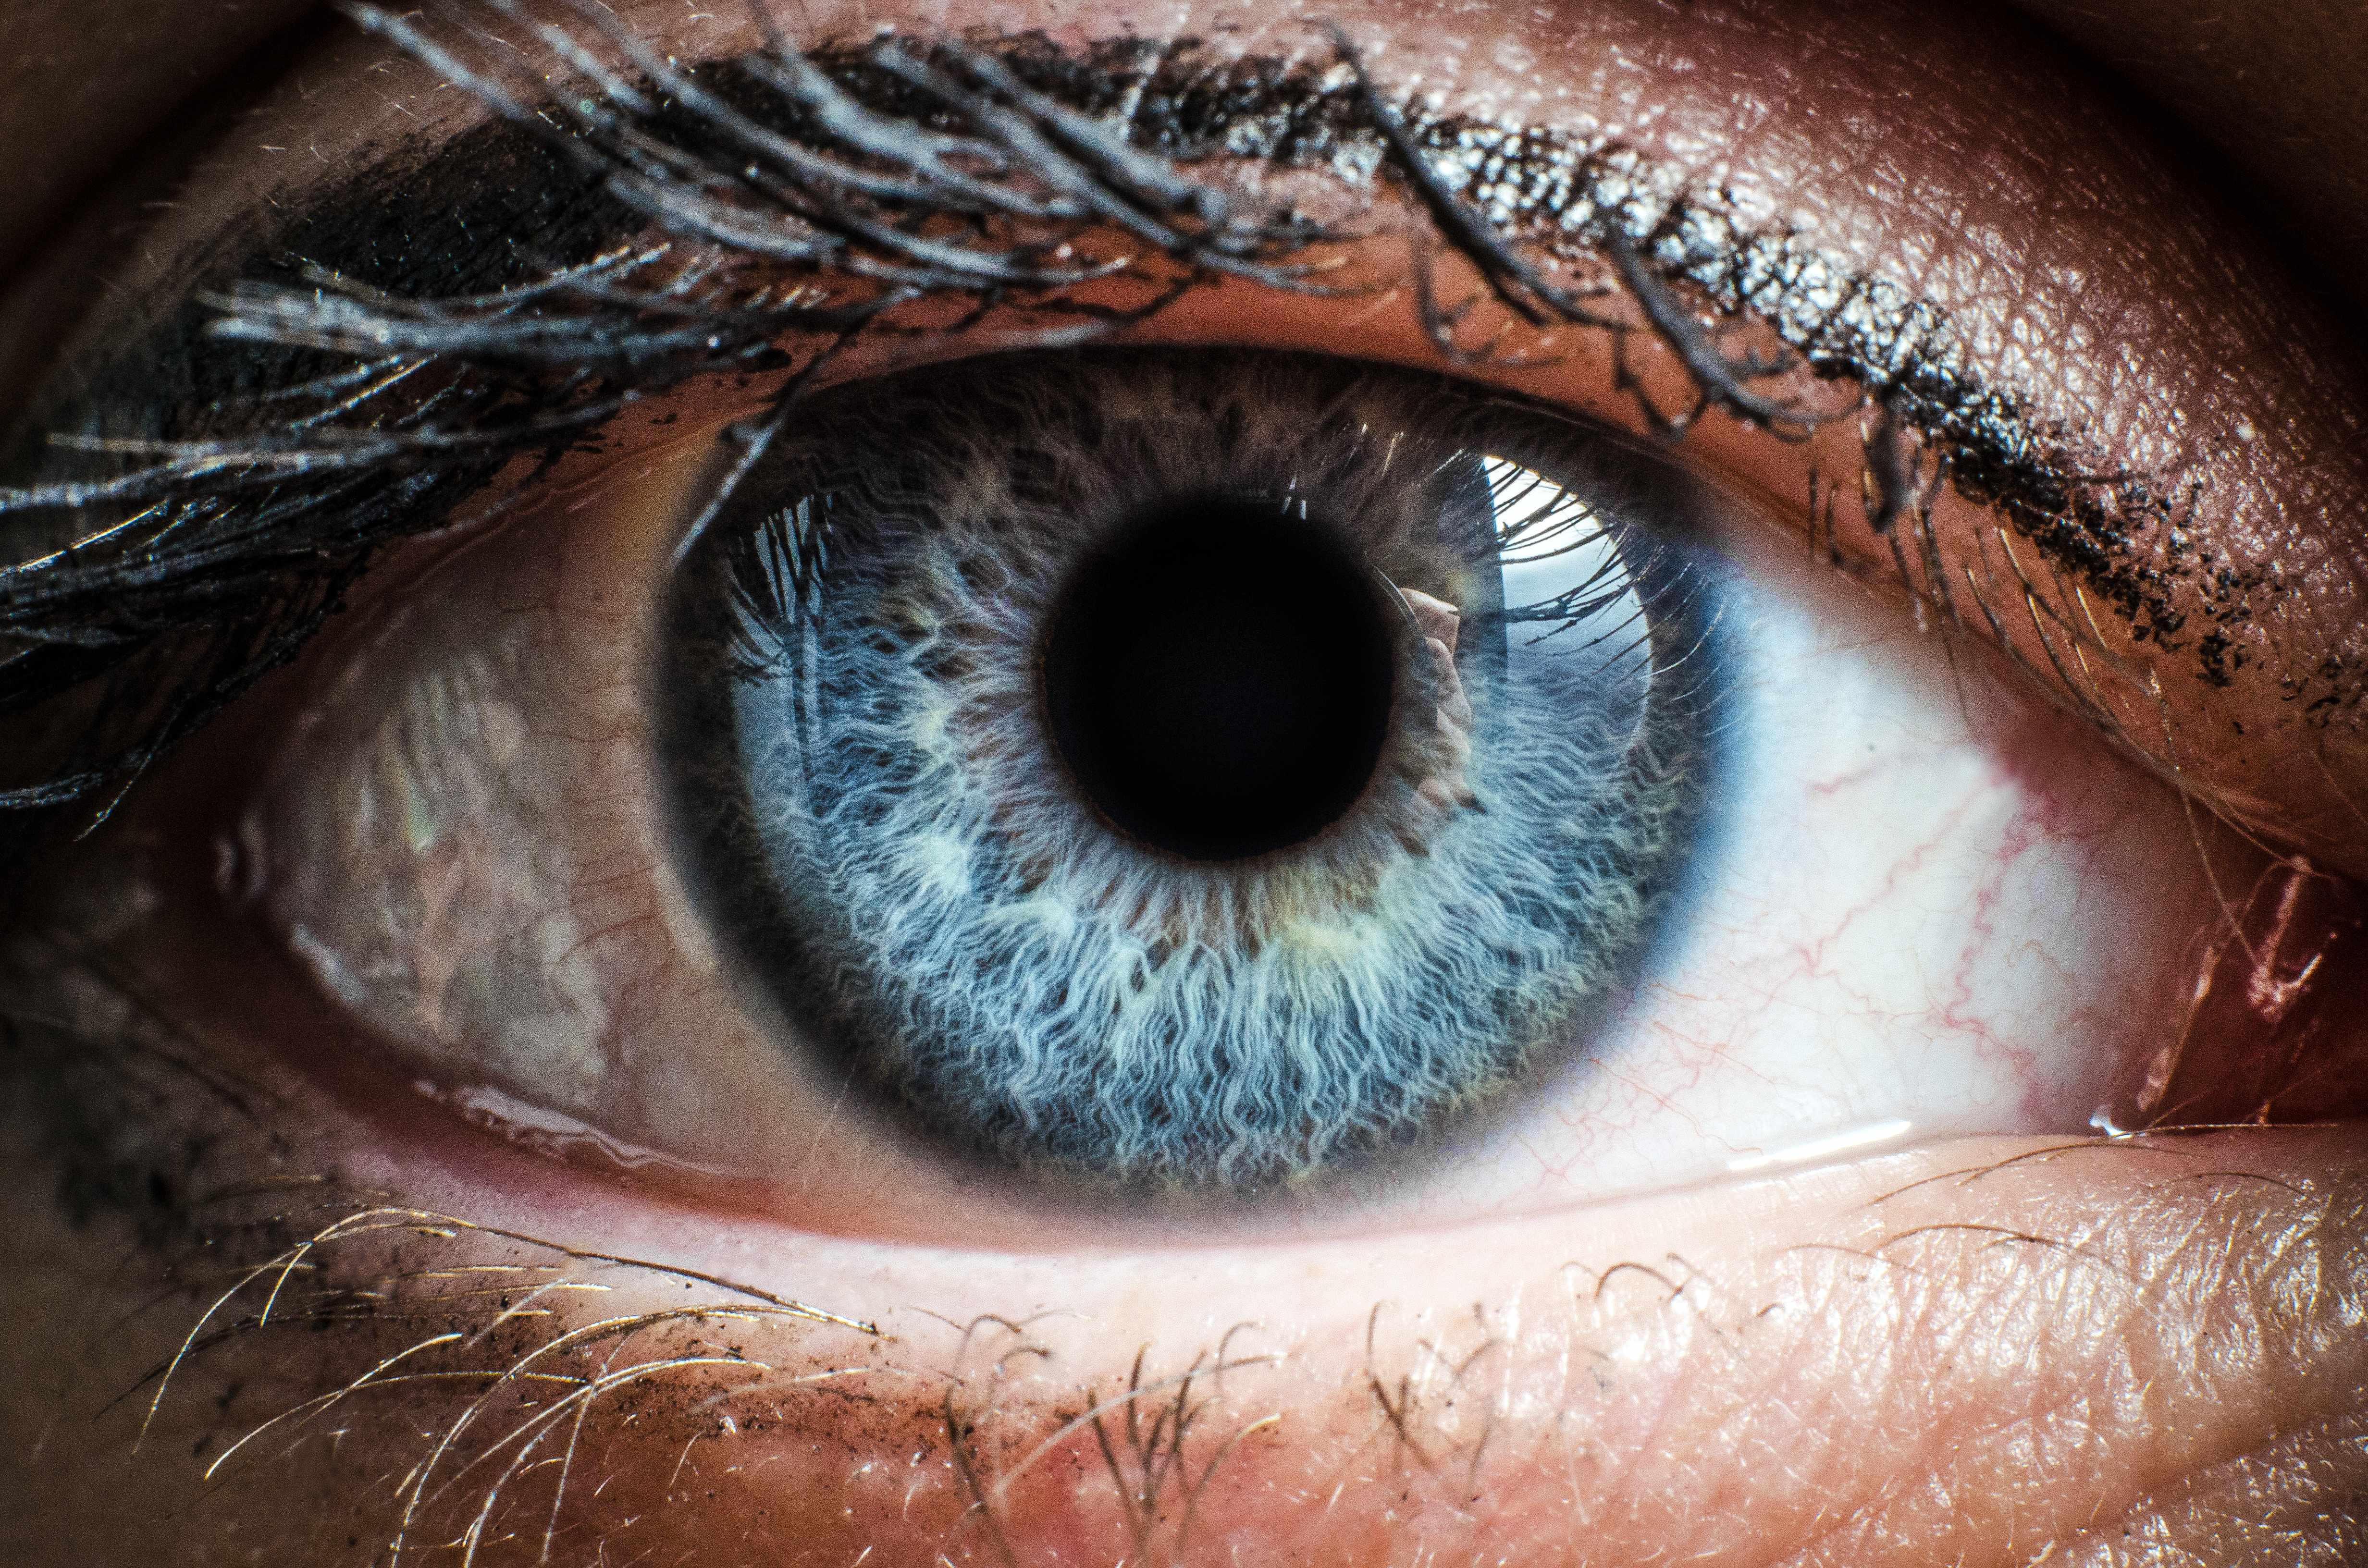 close up of a person's right eye, blue with lashes